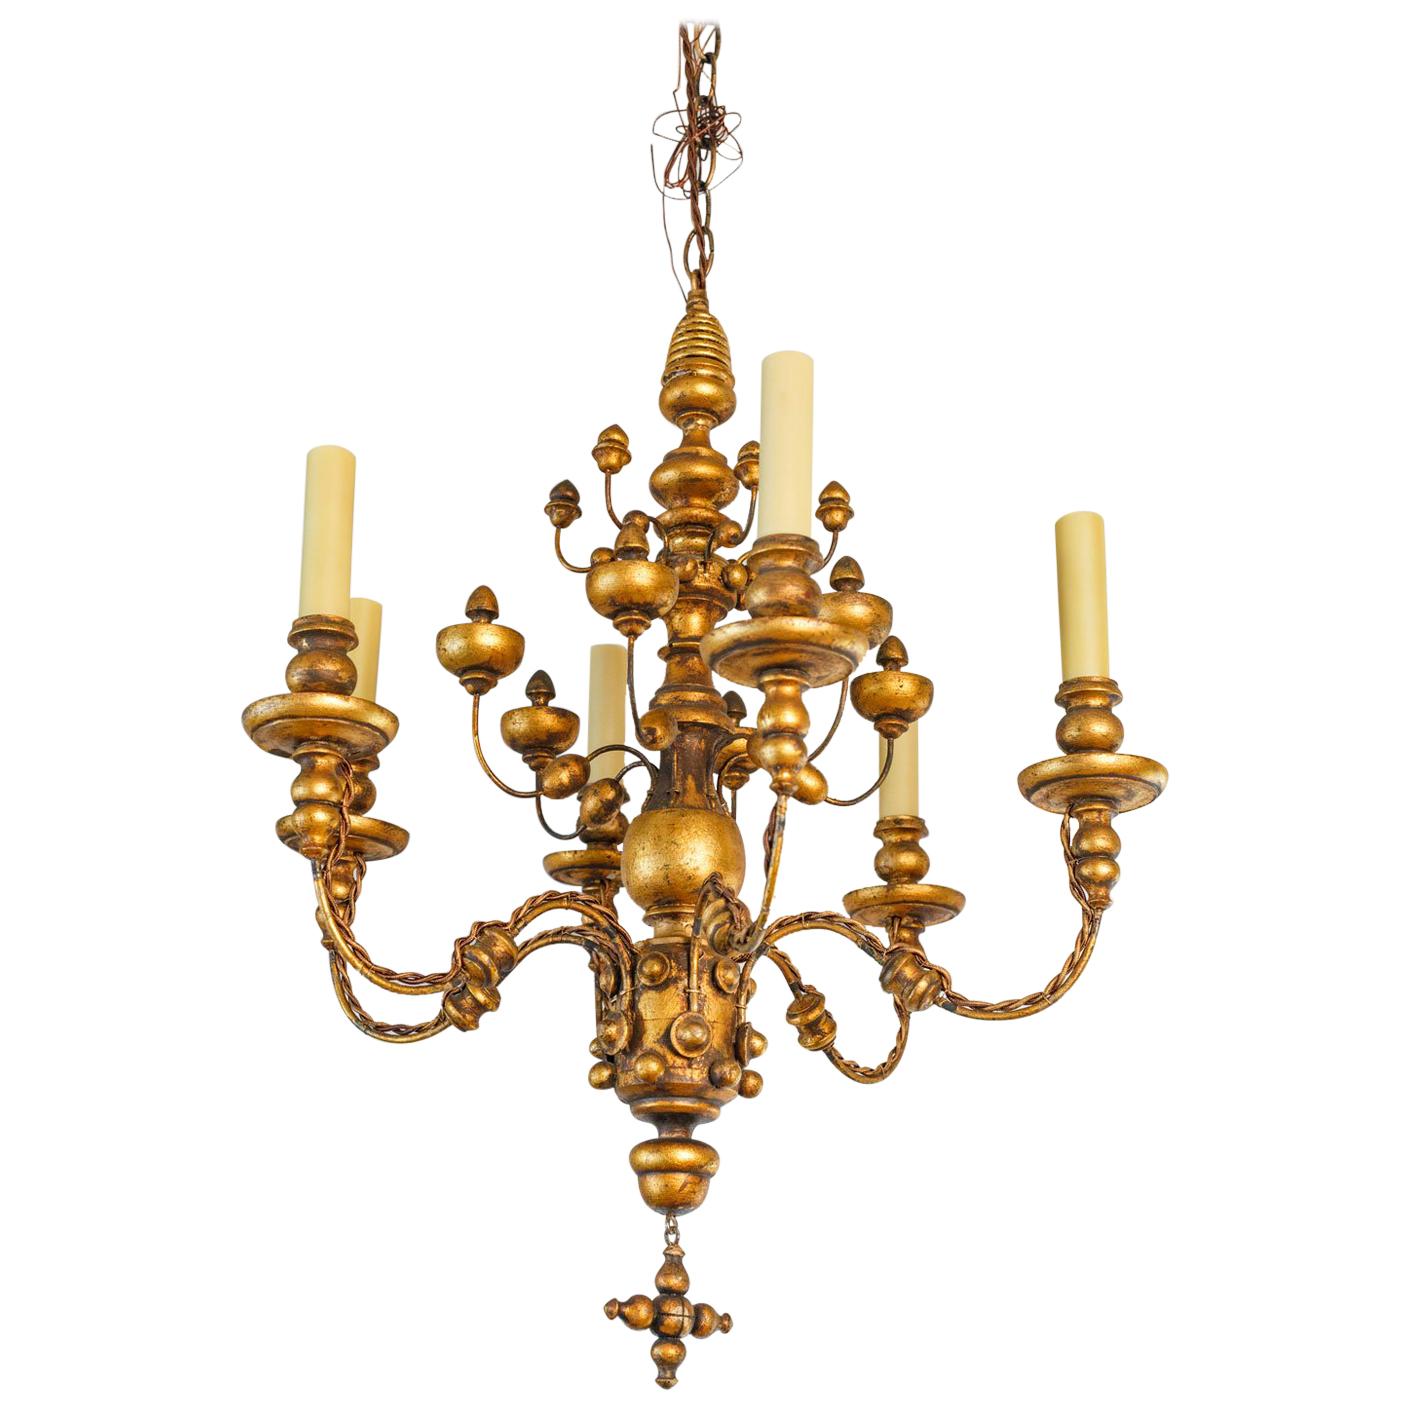 Stunning Gilt  Italian Chandelier of Metal and Wood with  playful design.  For Sale